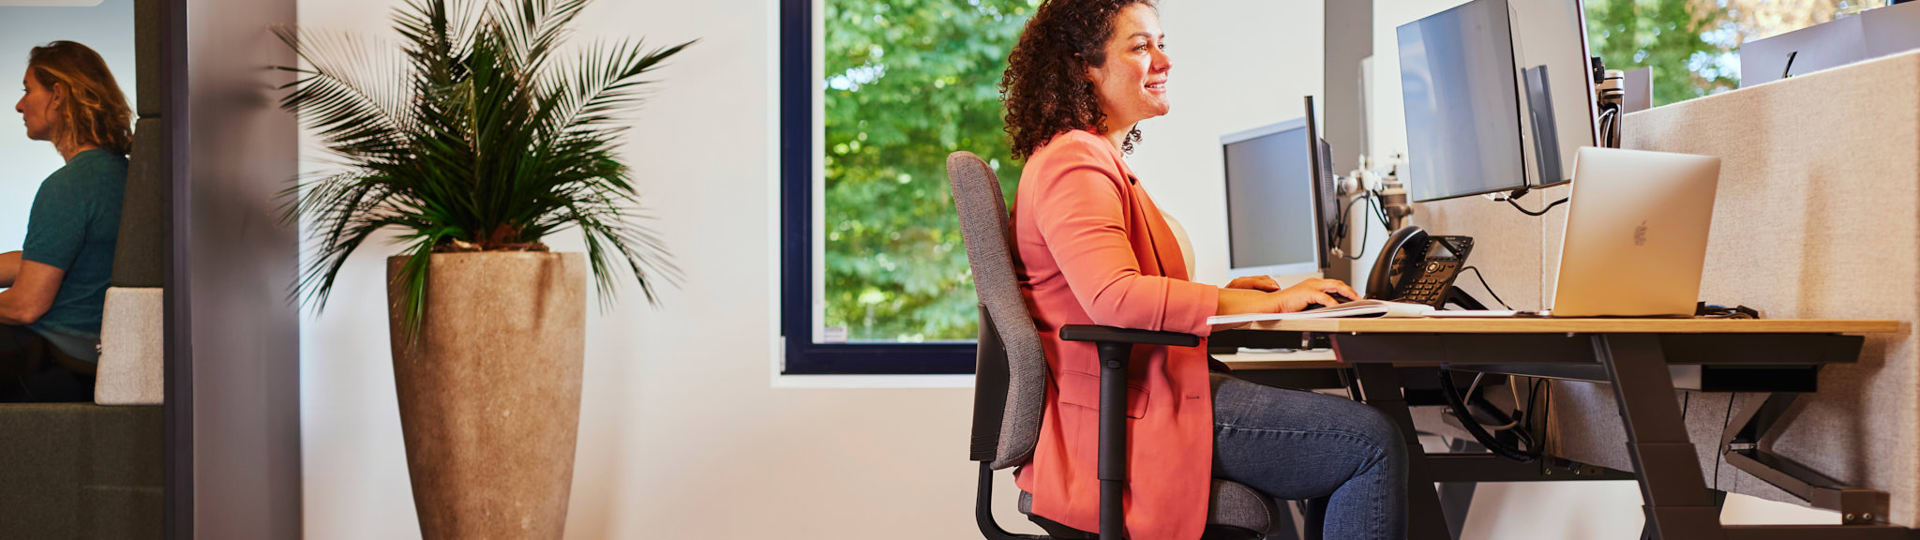 Why a footrest at your desk is good for you